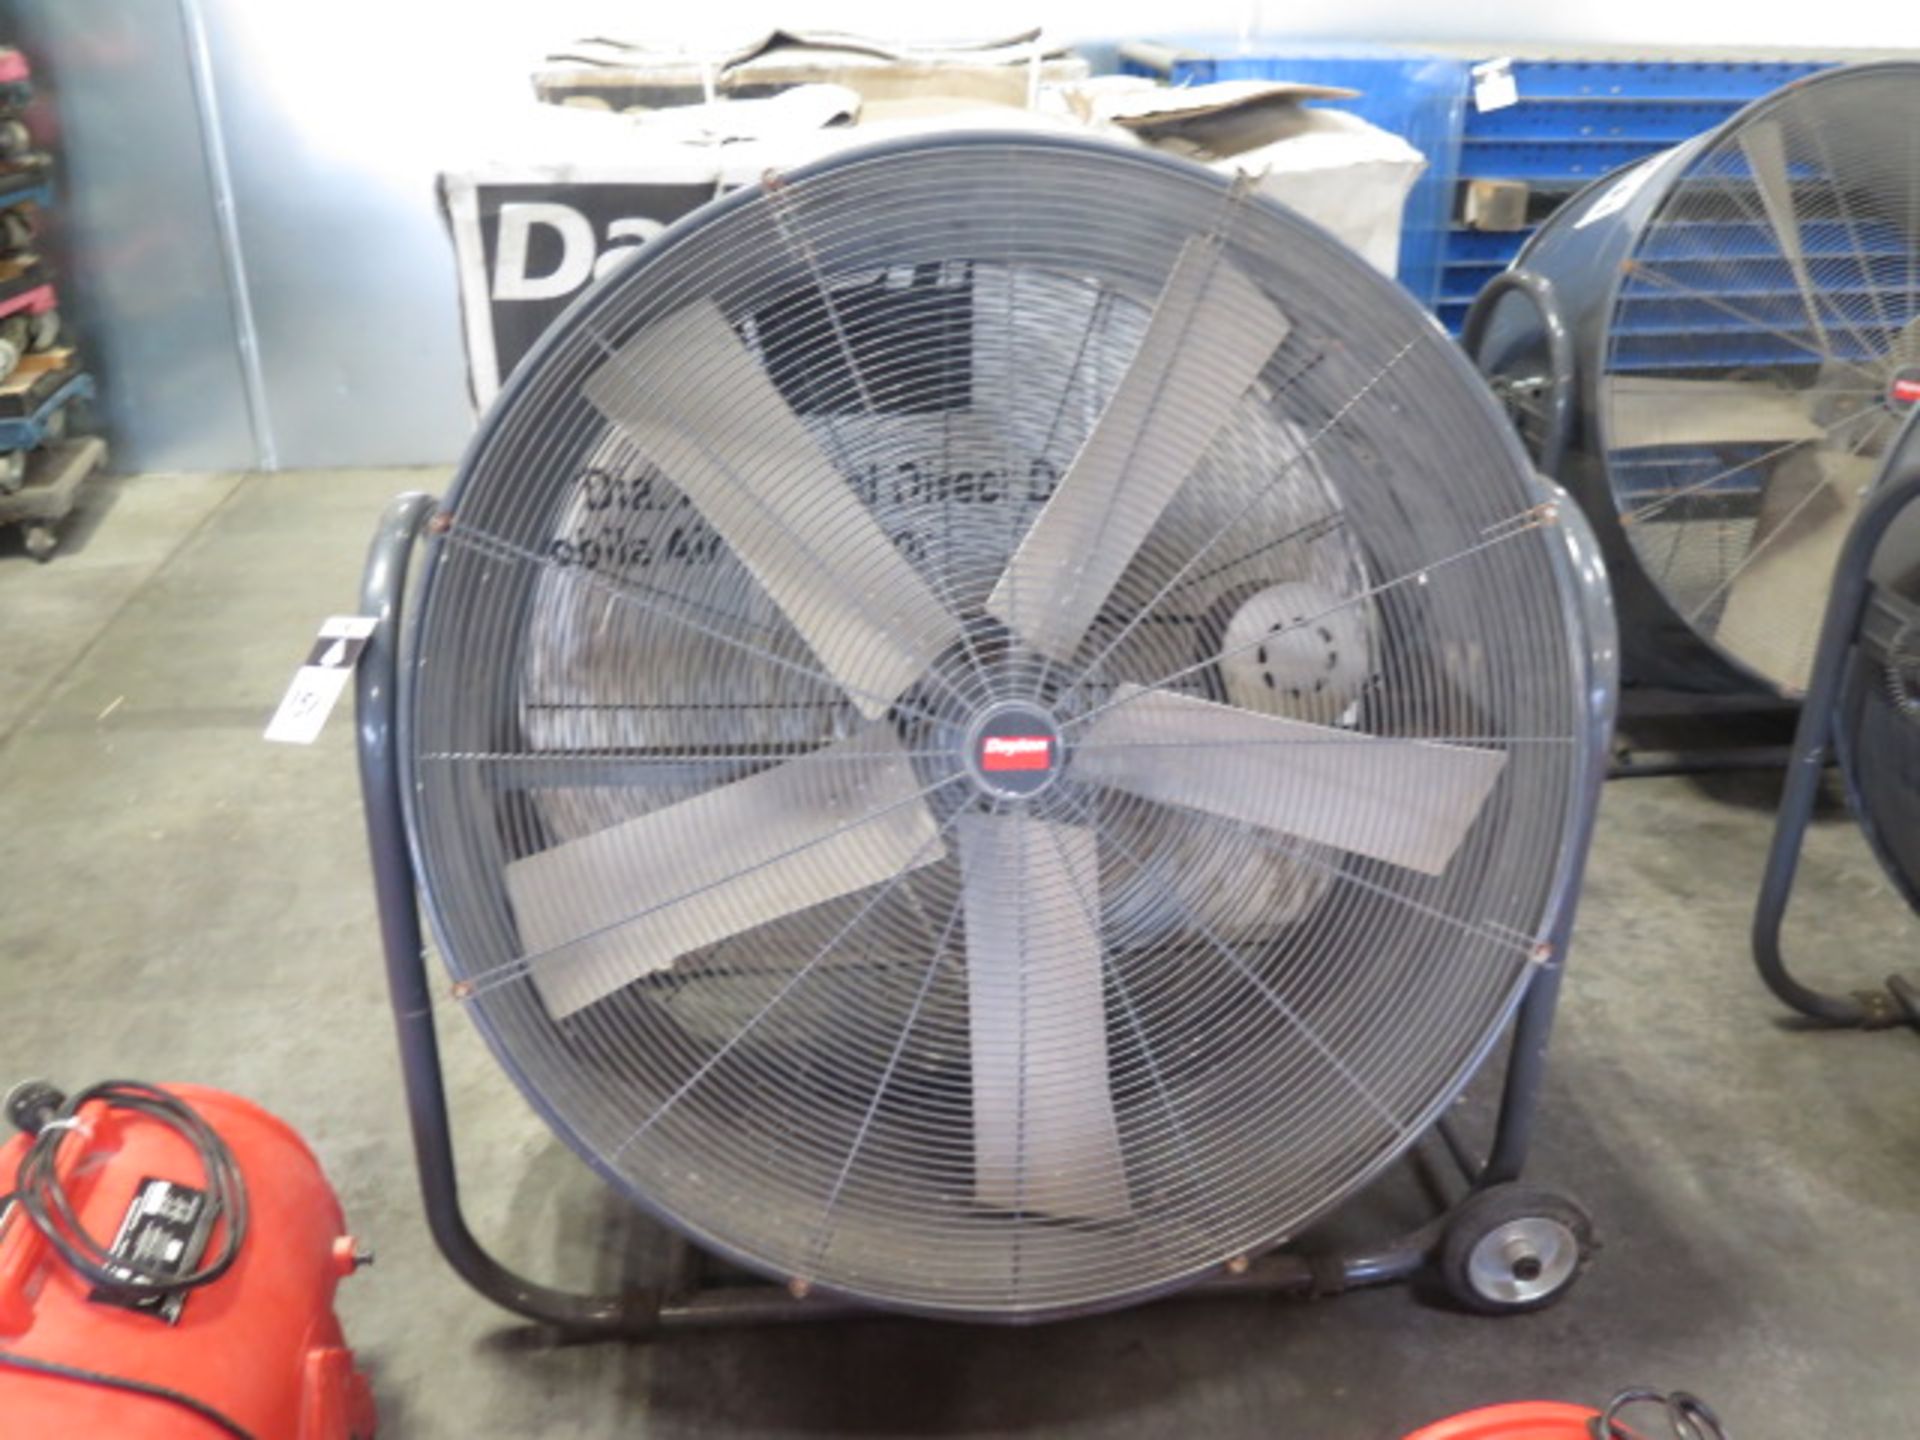 Dayton 42" Shop Fans (2) (1-NEW and 1-Used) (SOLD AS-IS - NO WARRANTY) - Image 2 of 6